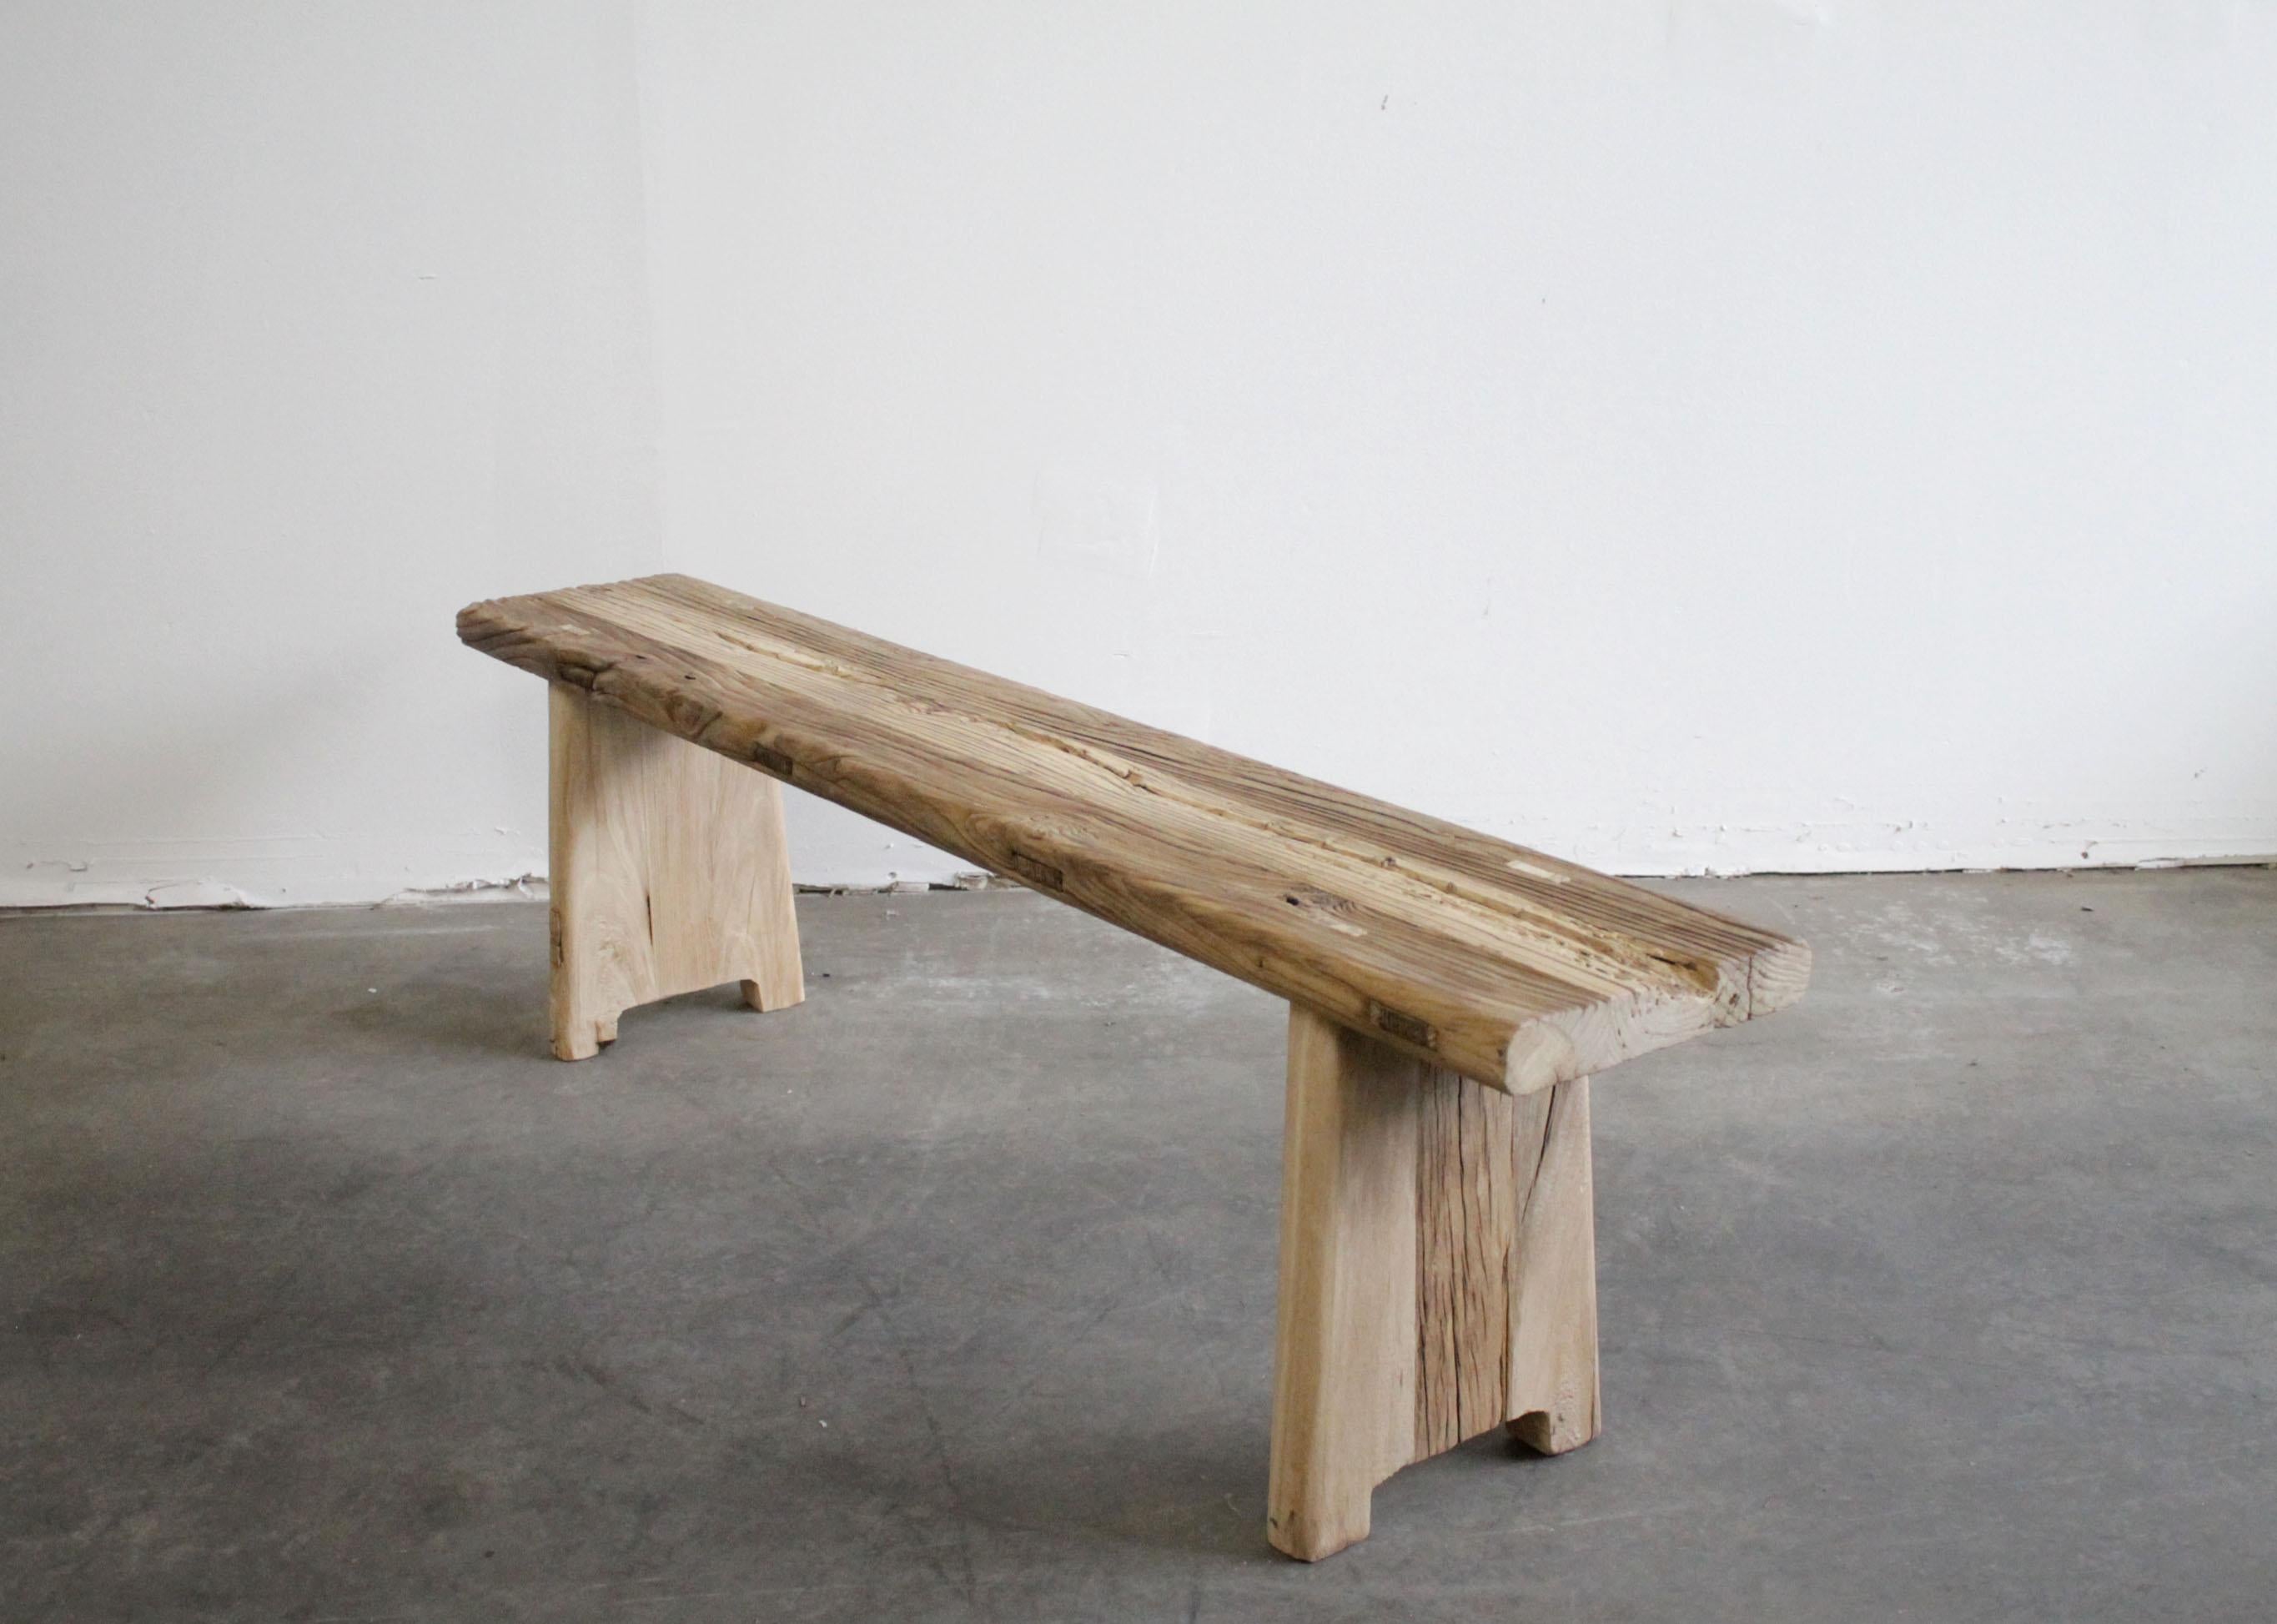 Reclaimed vintage elm wood bench
Vintage reclaimed elm wood benches! Beautiful antique patina, with weathering and age, these are solid and sturdy ready for daily use, use as as a table behind a sofa, stool, coffee table, they are great for any